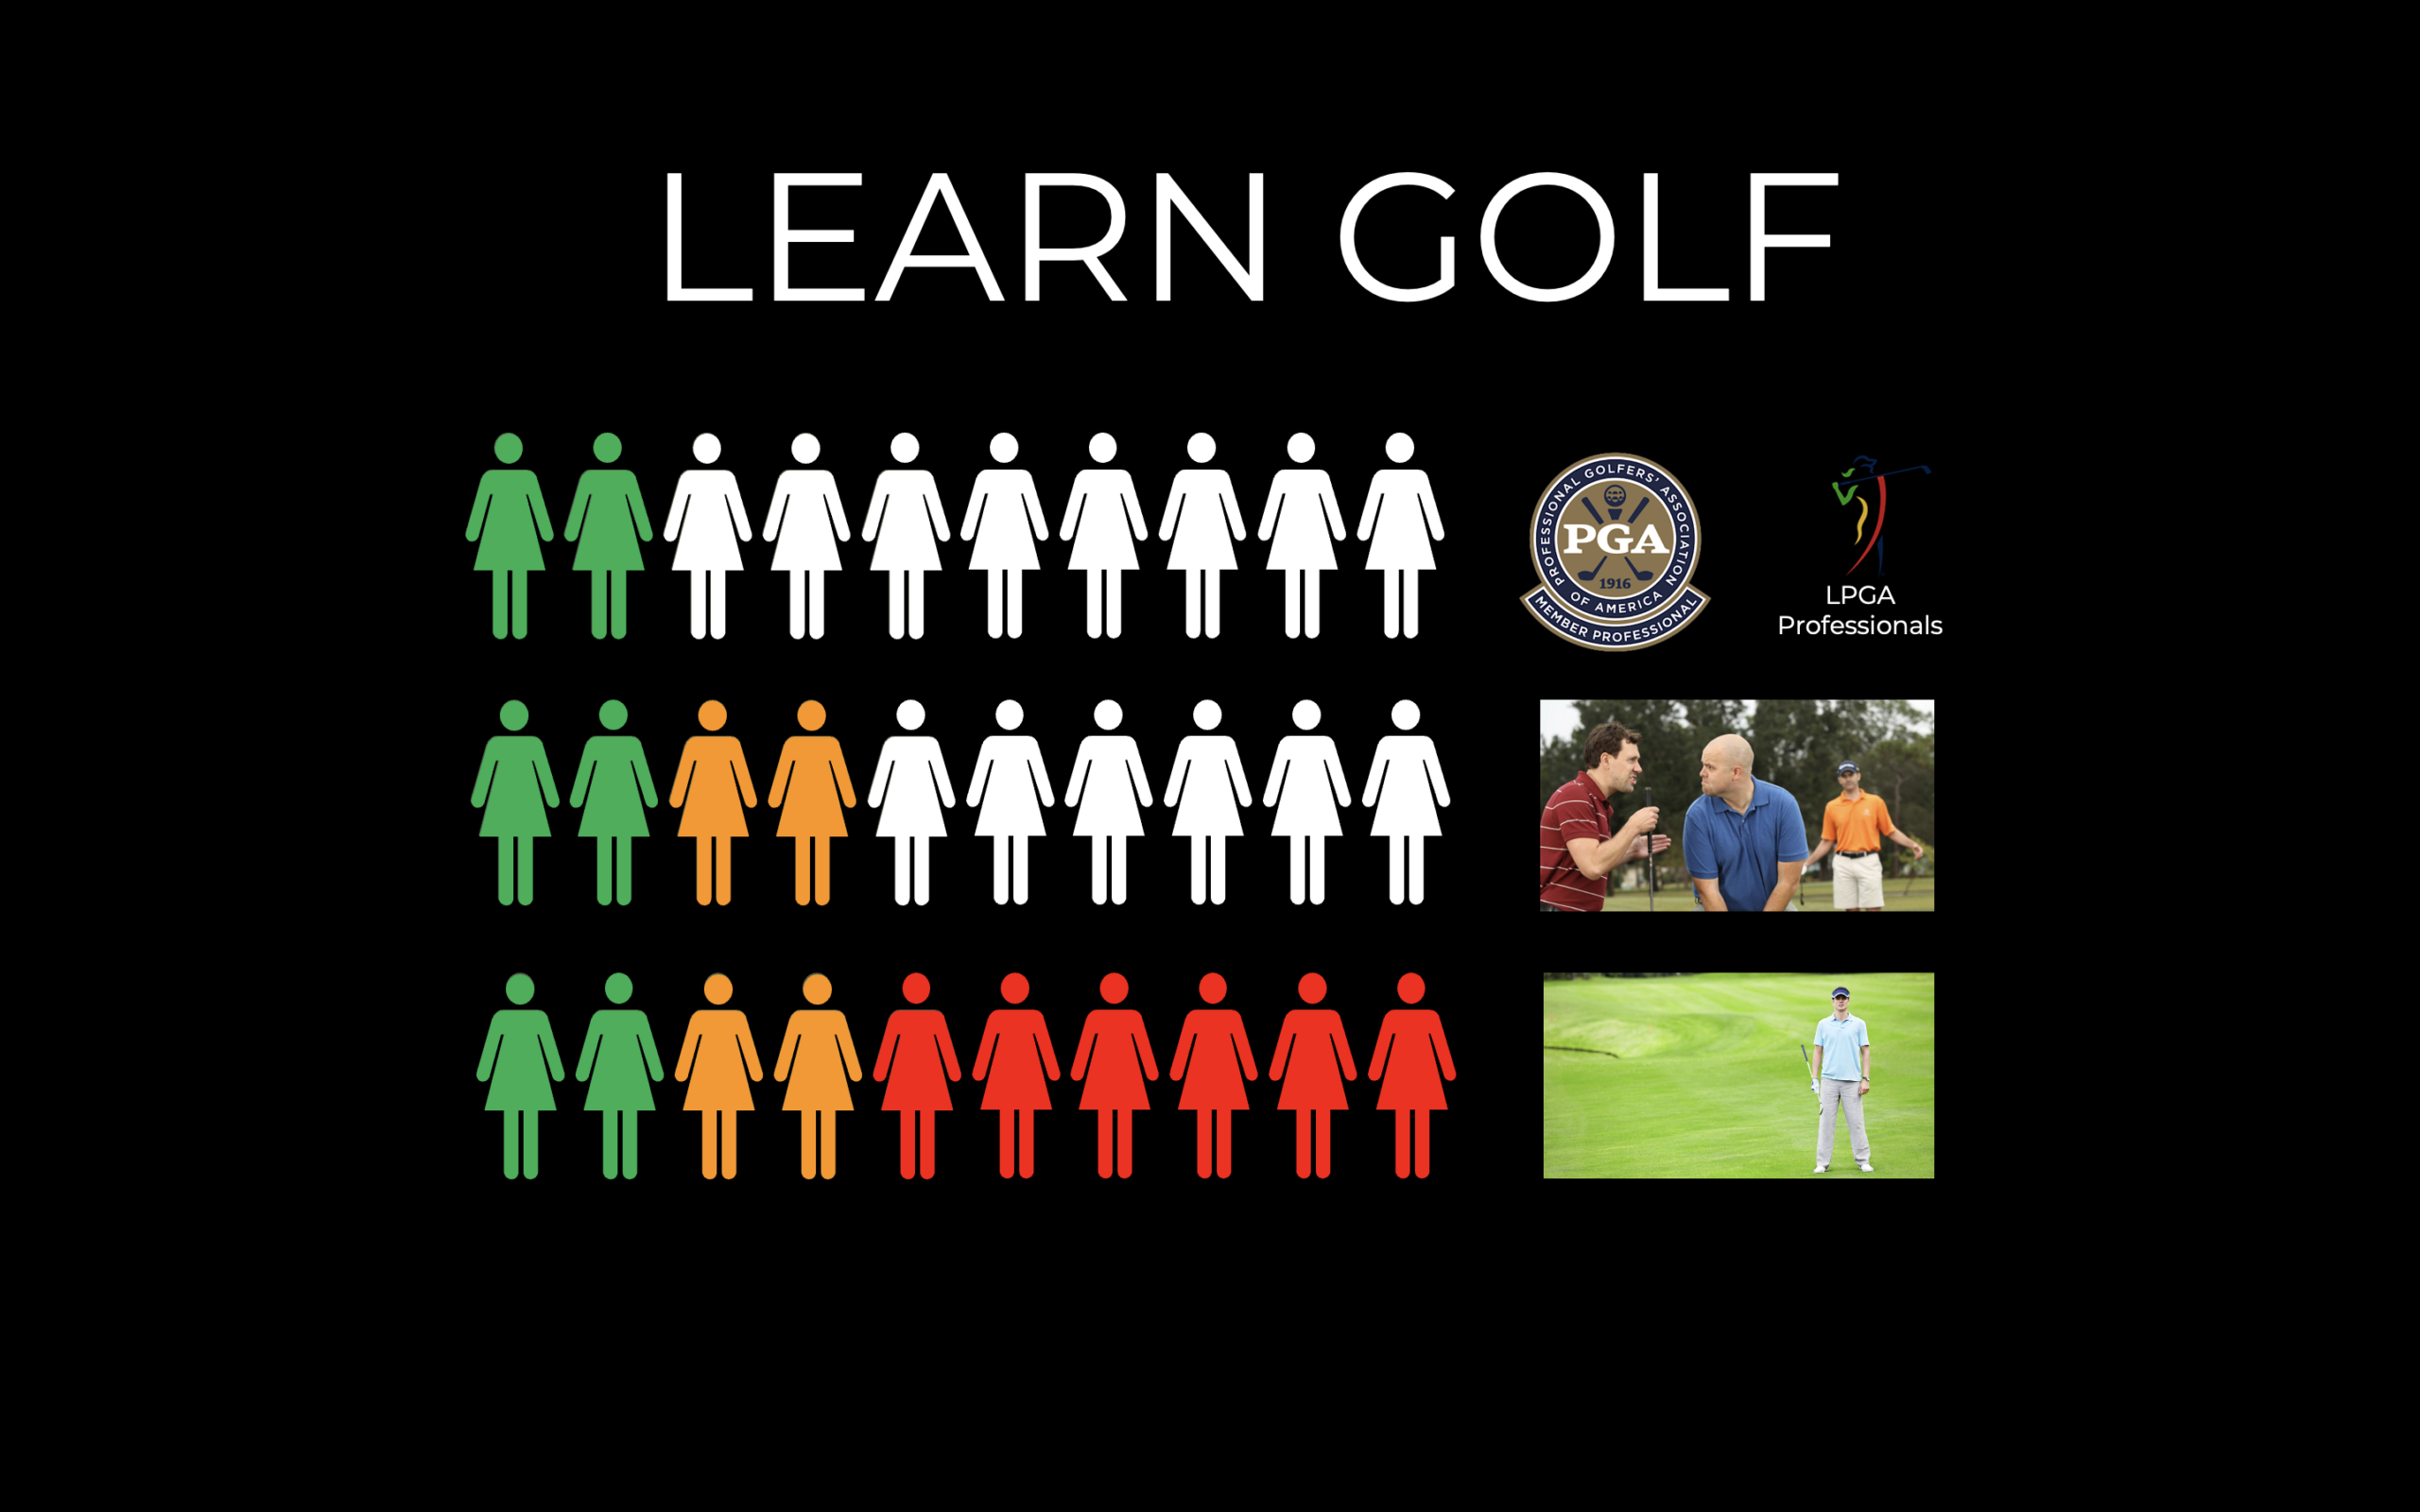 Graph showing how new golfers were first introduced to the game.